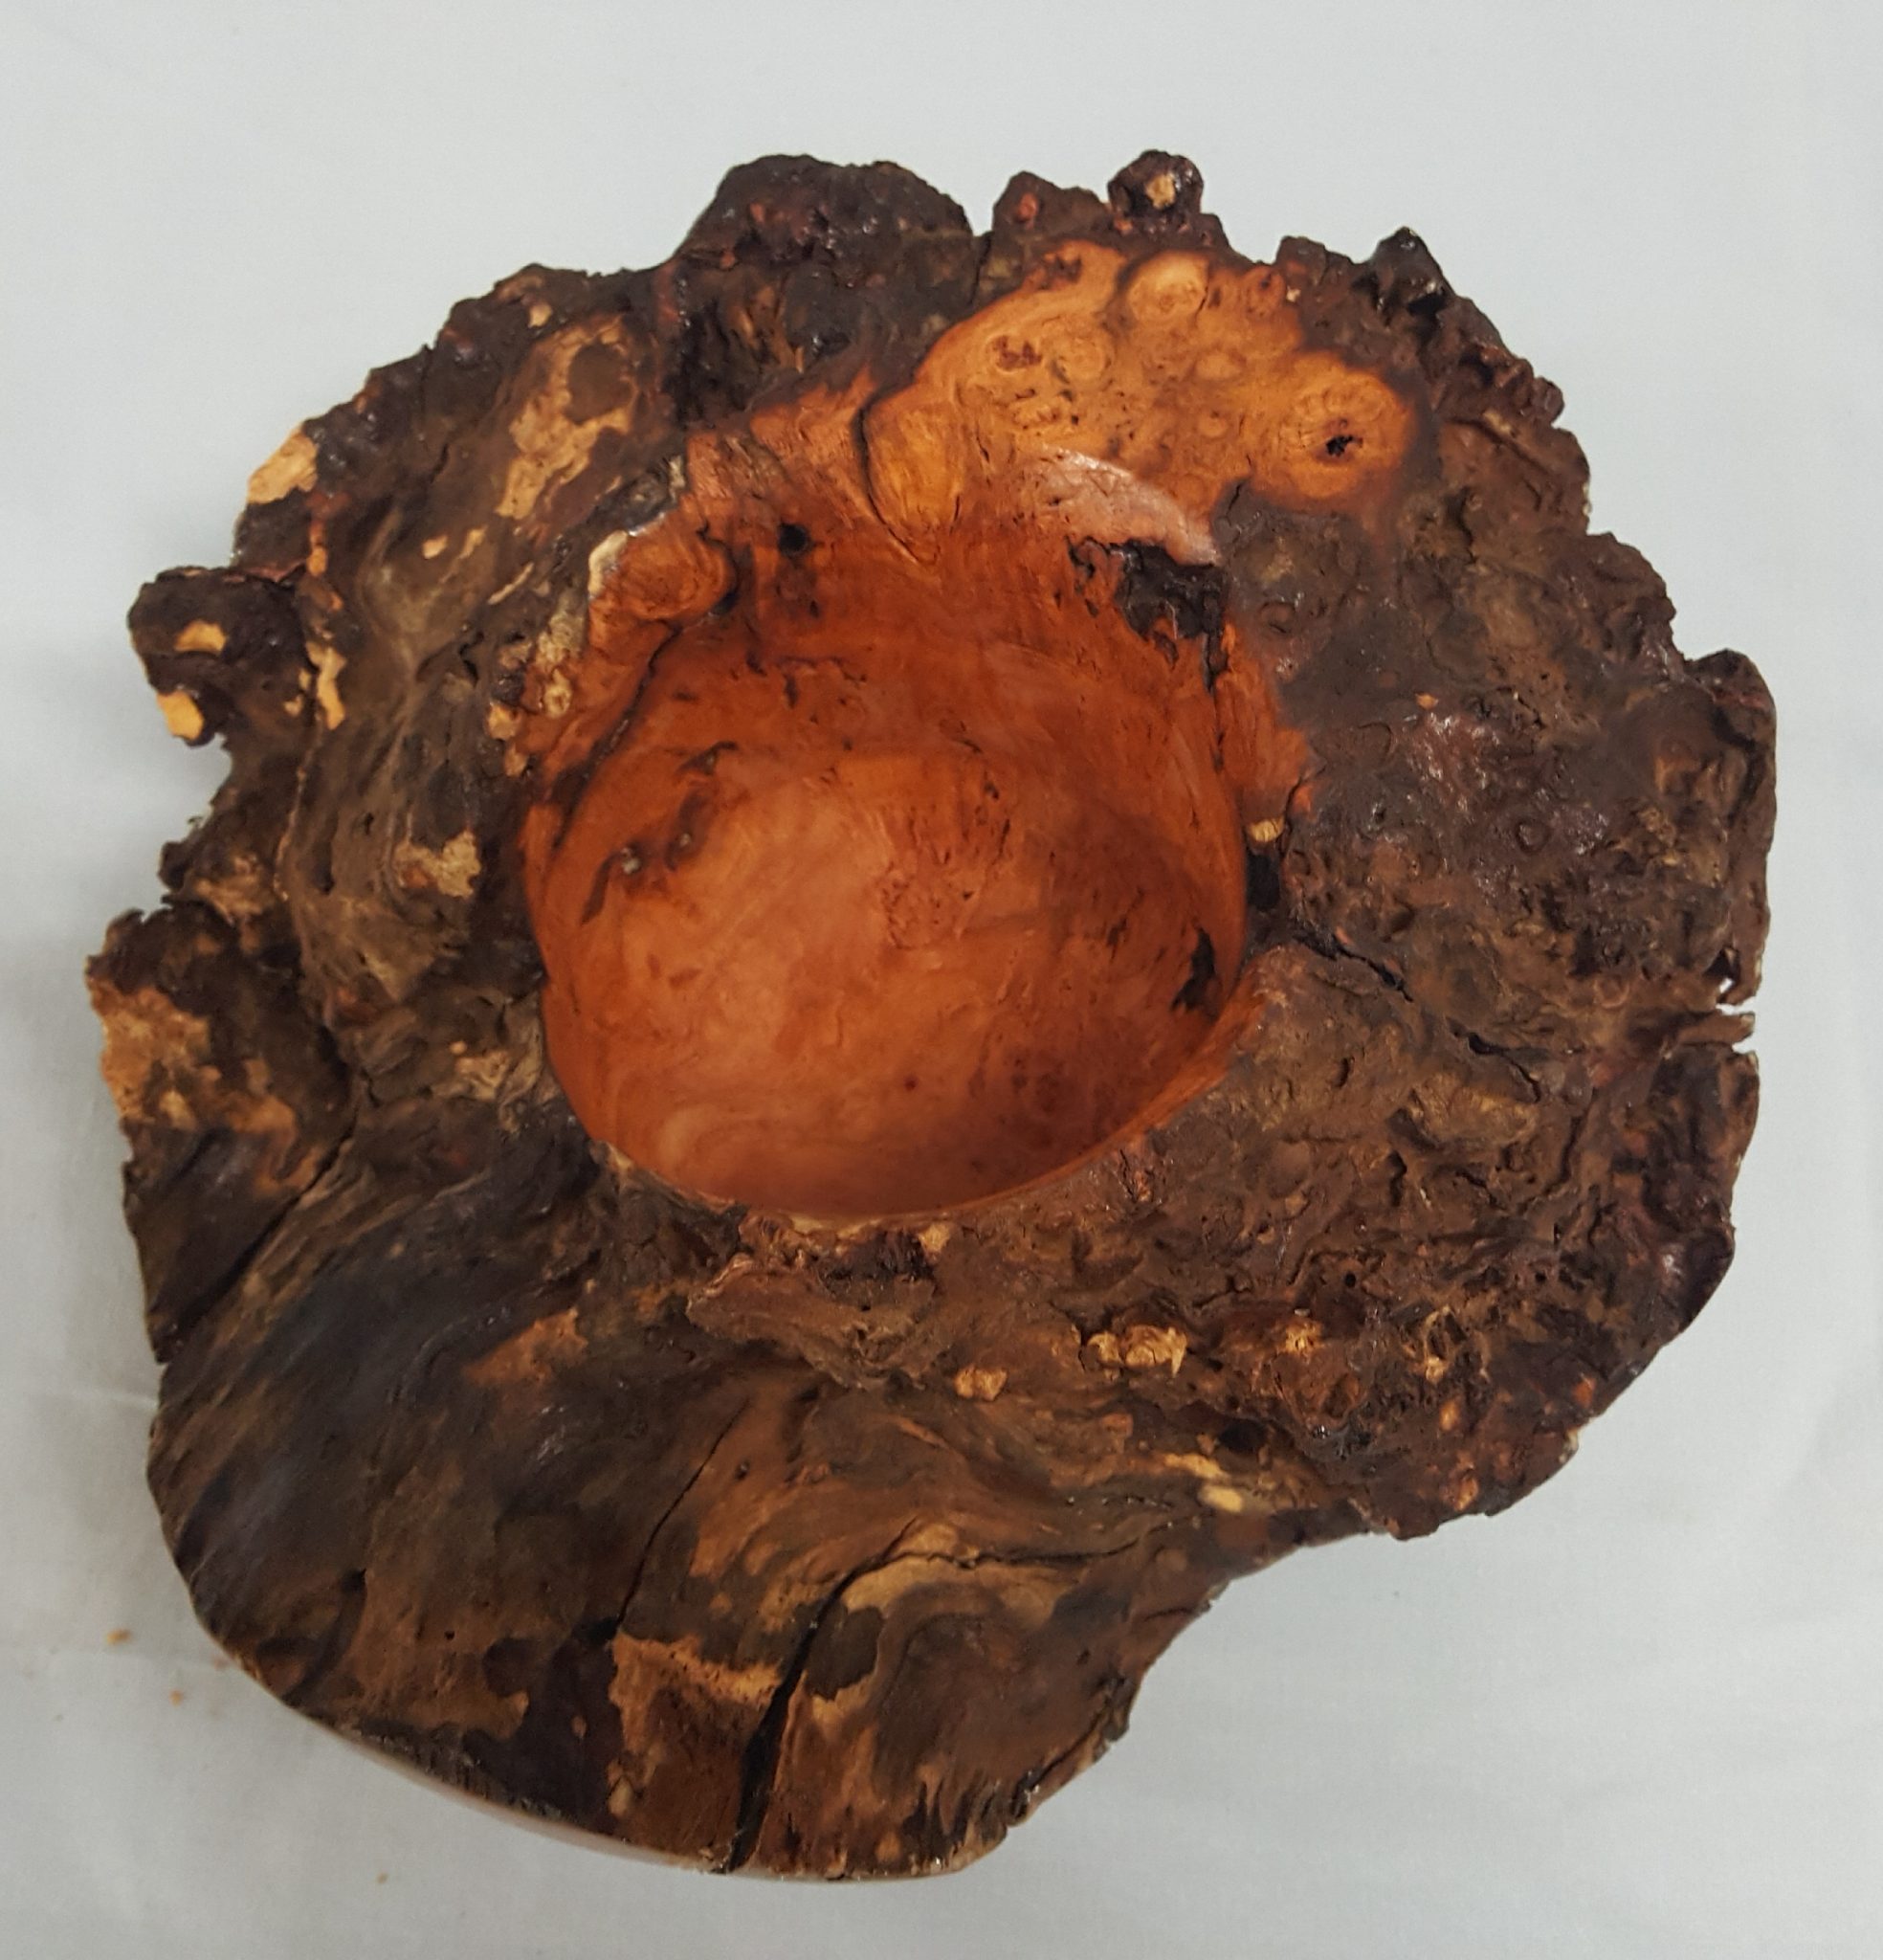 Cherry Burl turned to receive a 2" candle